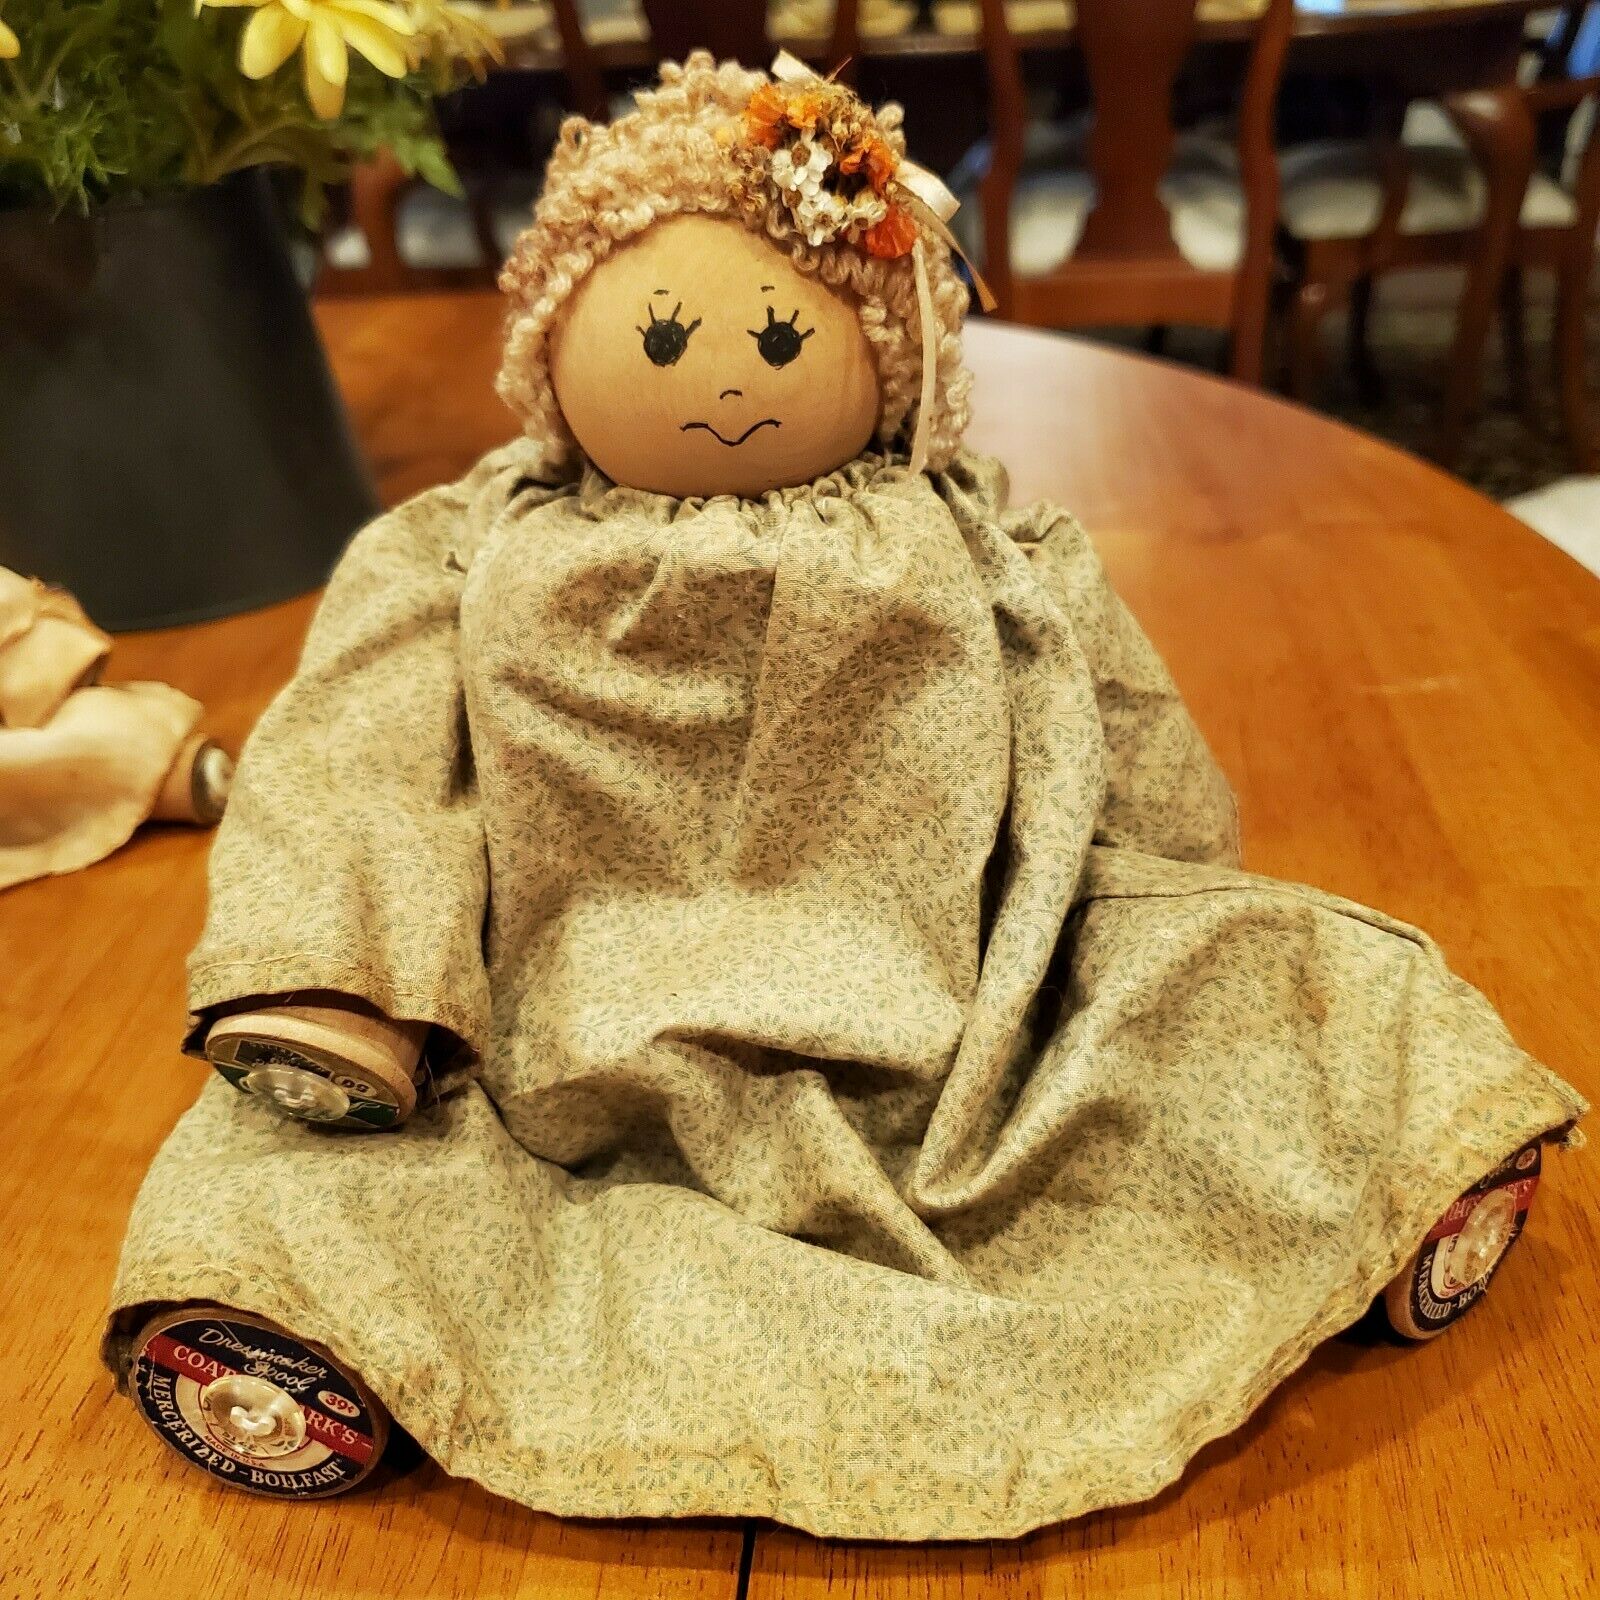 Antique Doll Made Of Wooden Spools